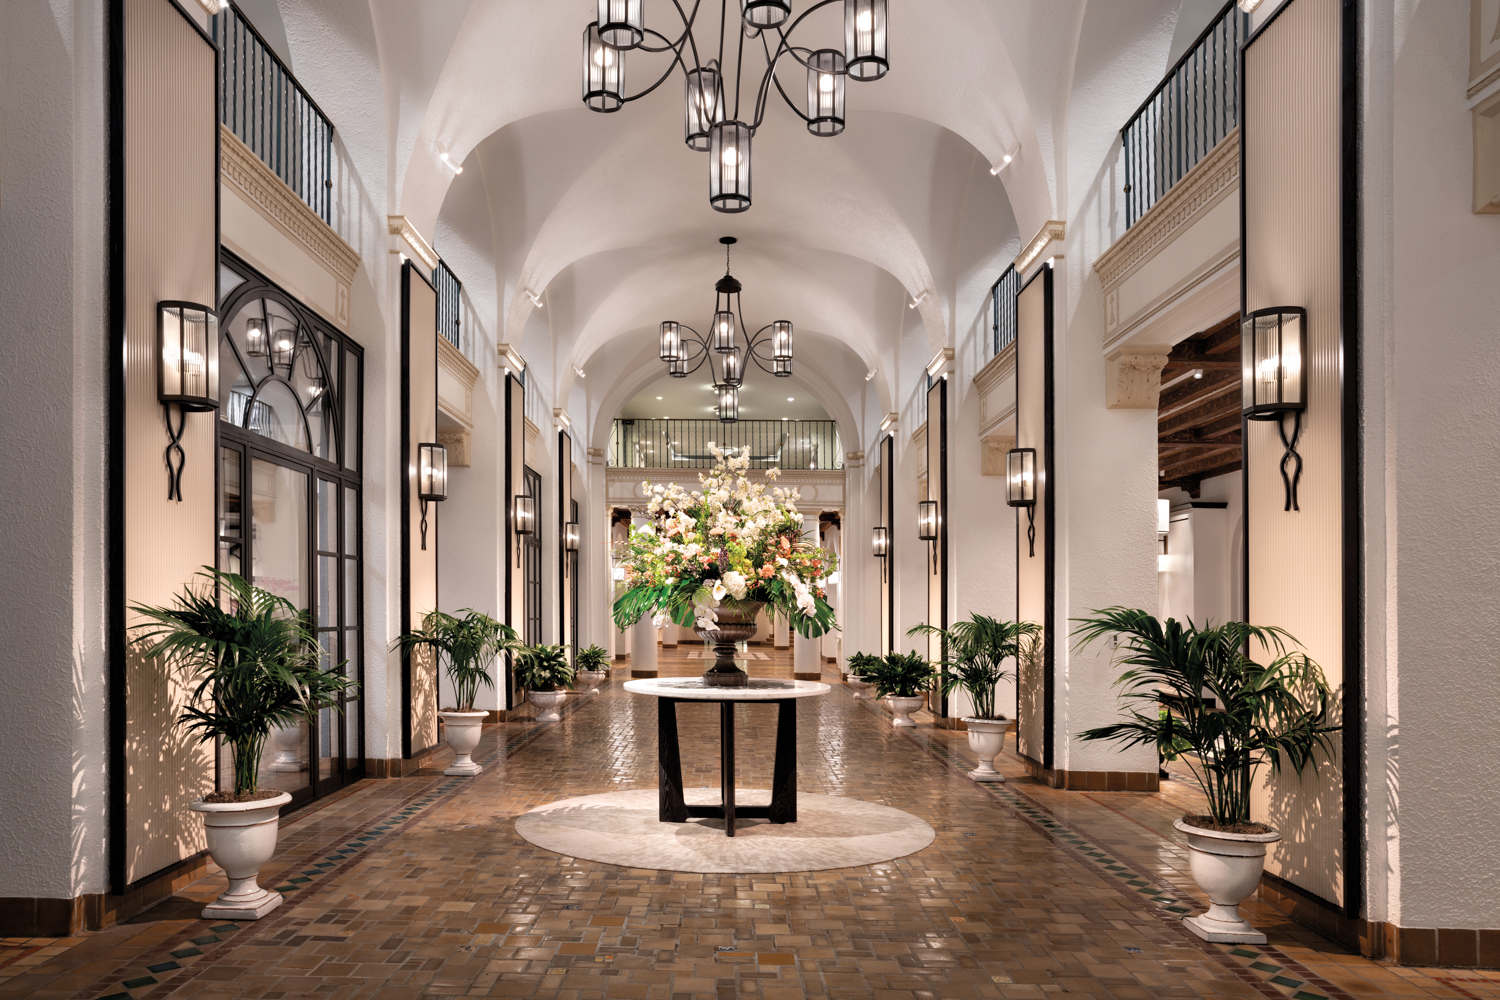 Ceramic floor, cypress beams and pilasters line a lobby studded with sconces and chandeliers